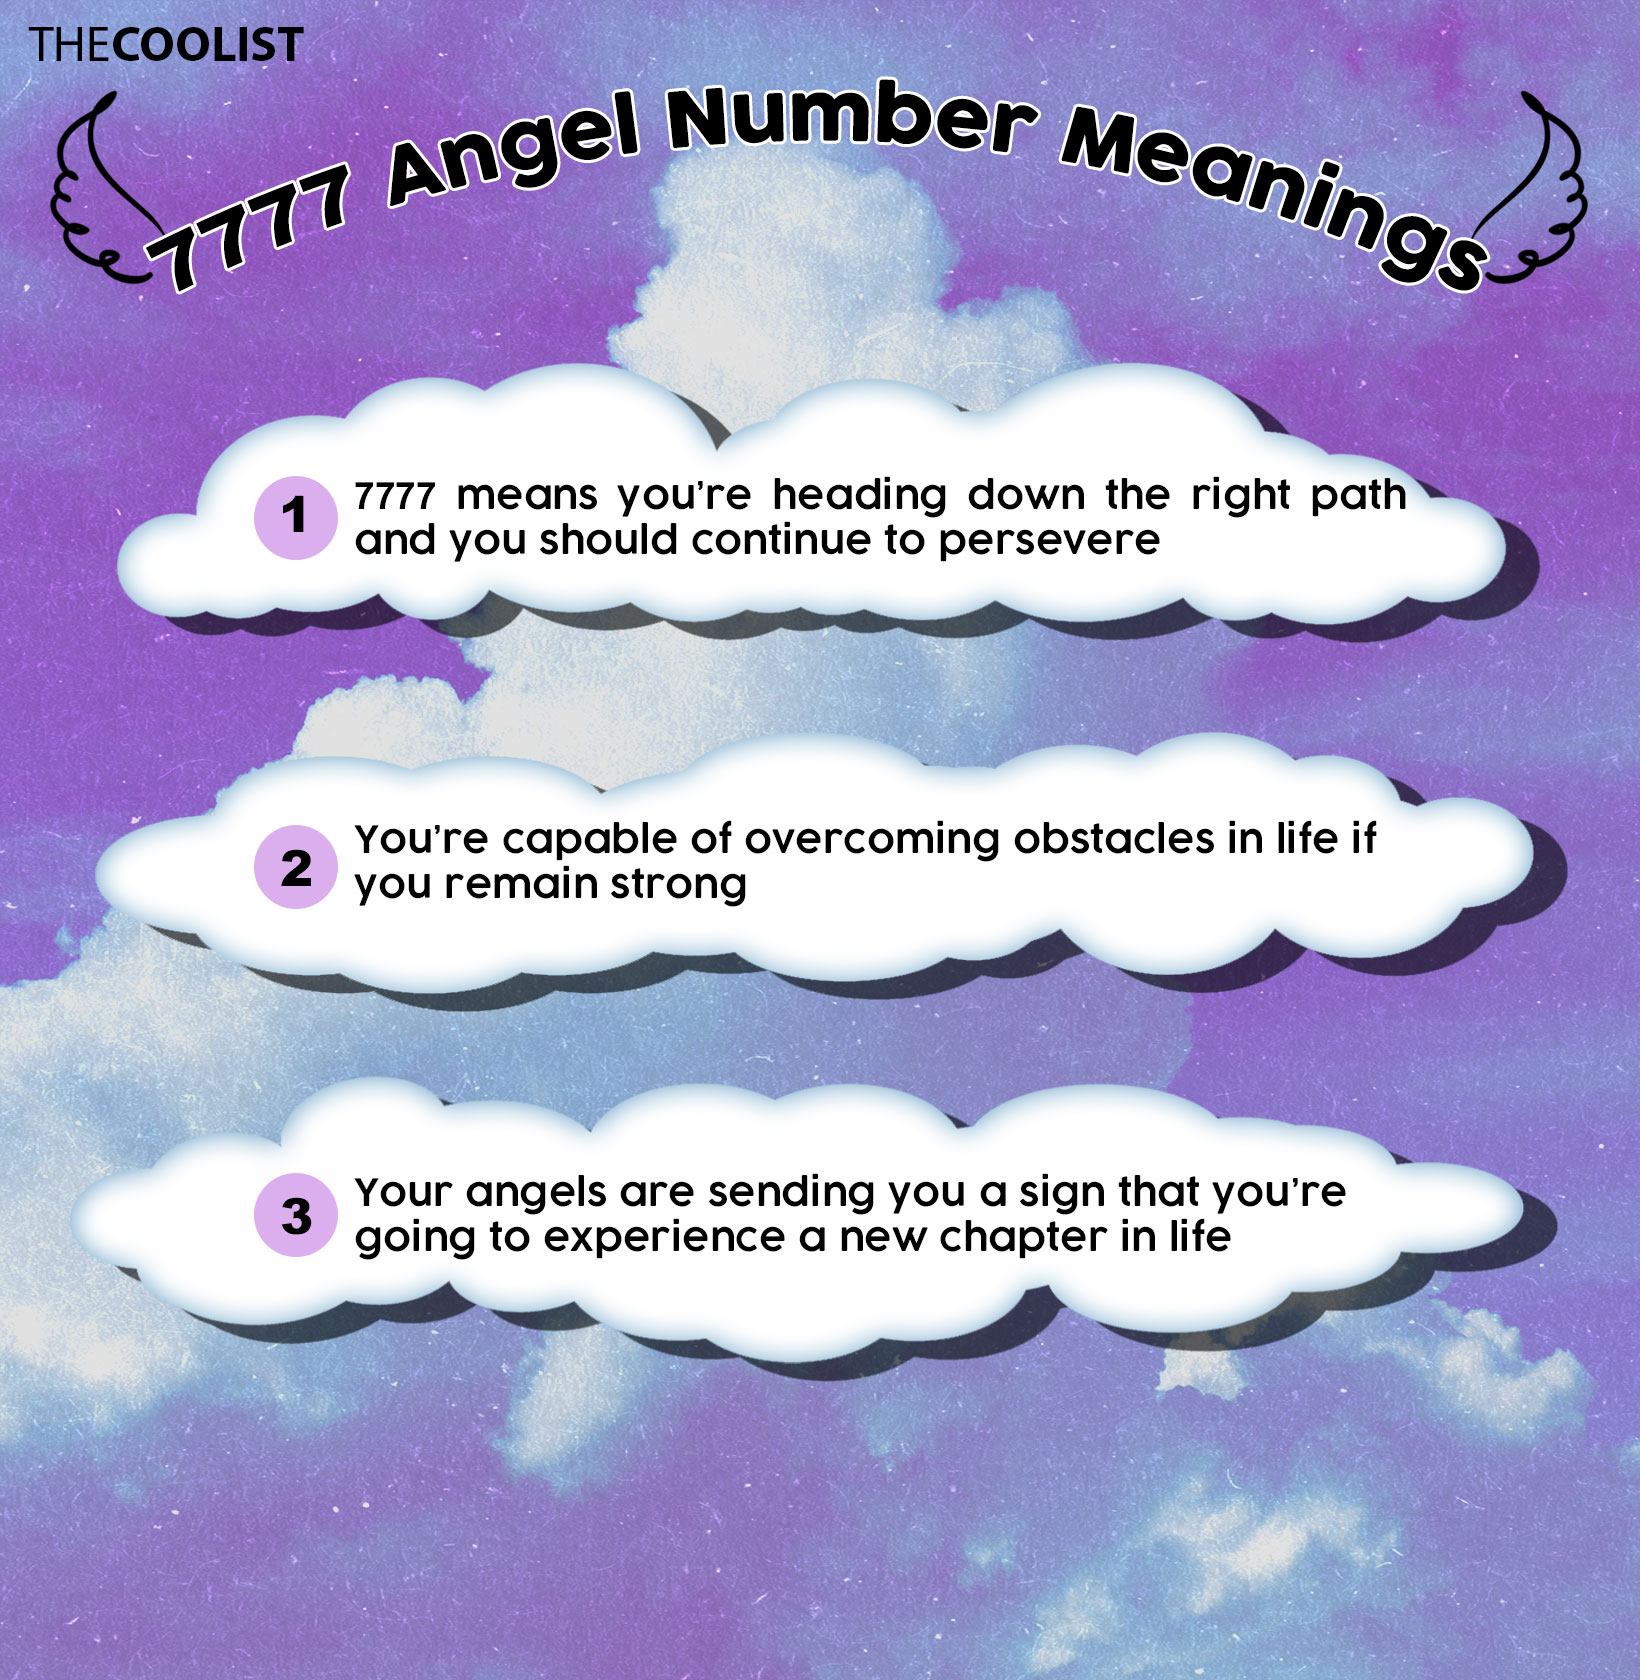 Infographic of 7777 angel number